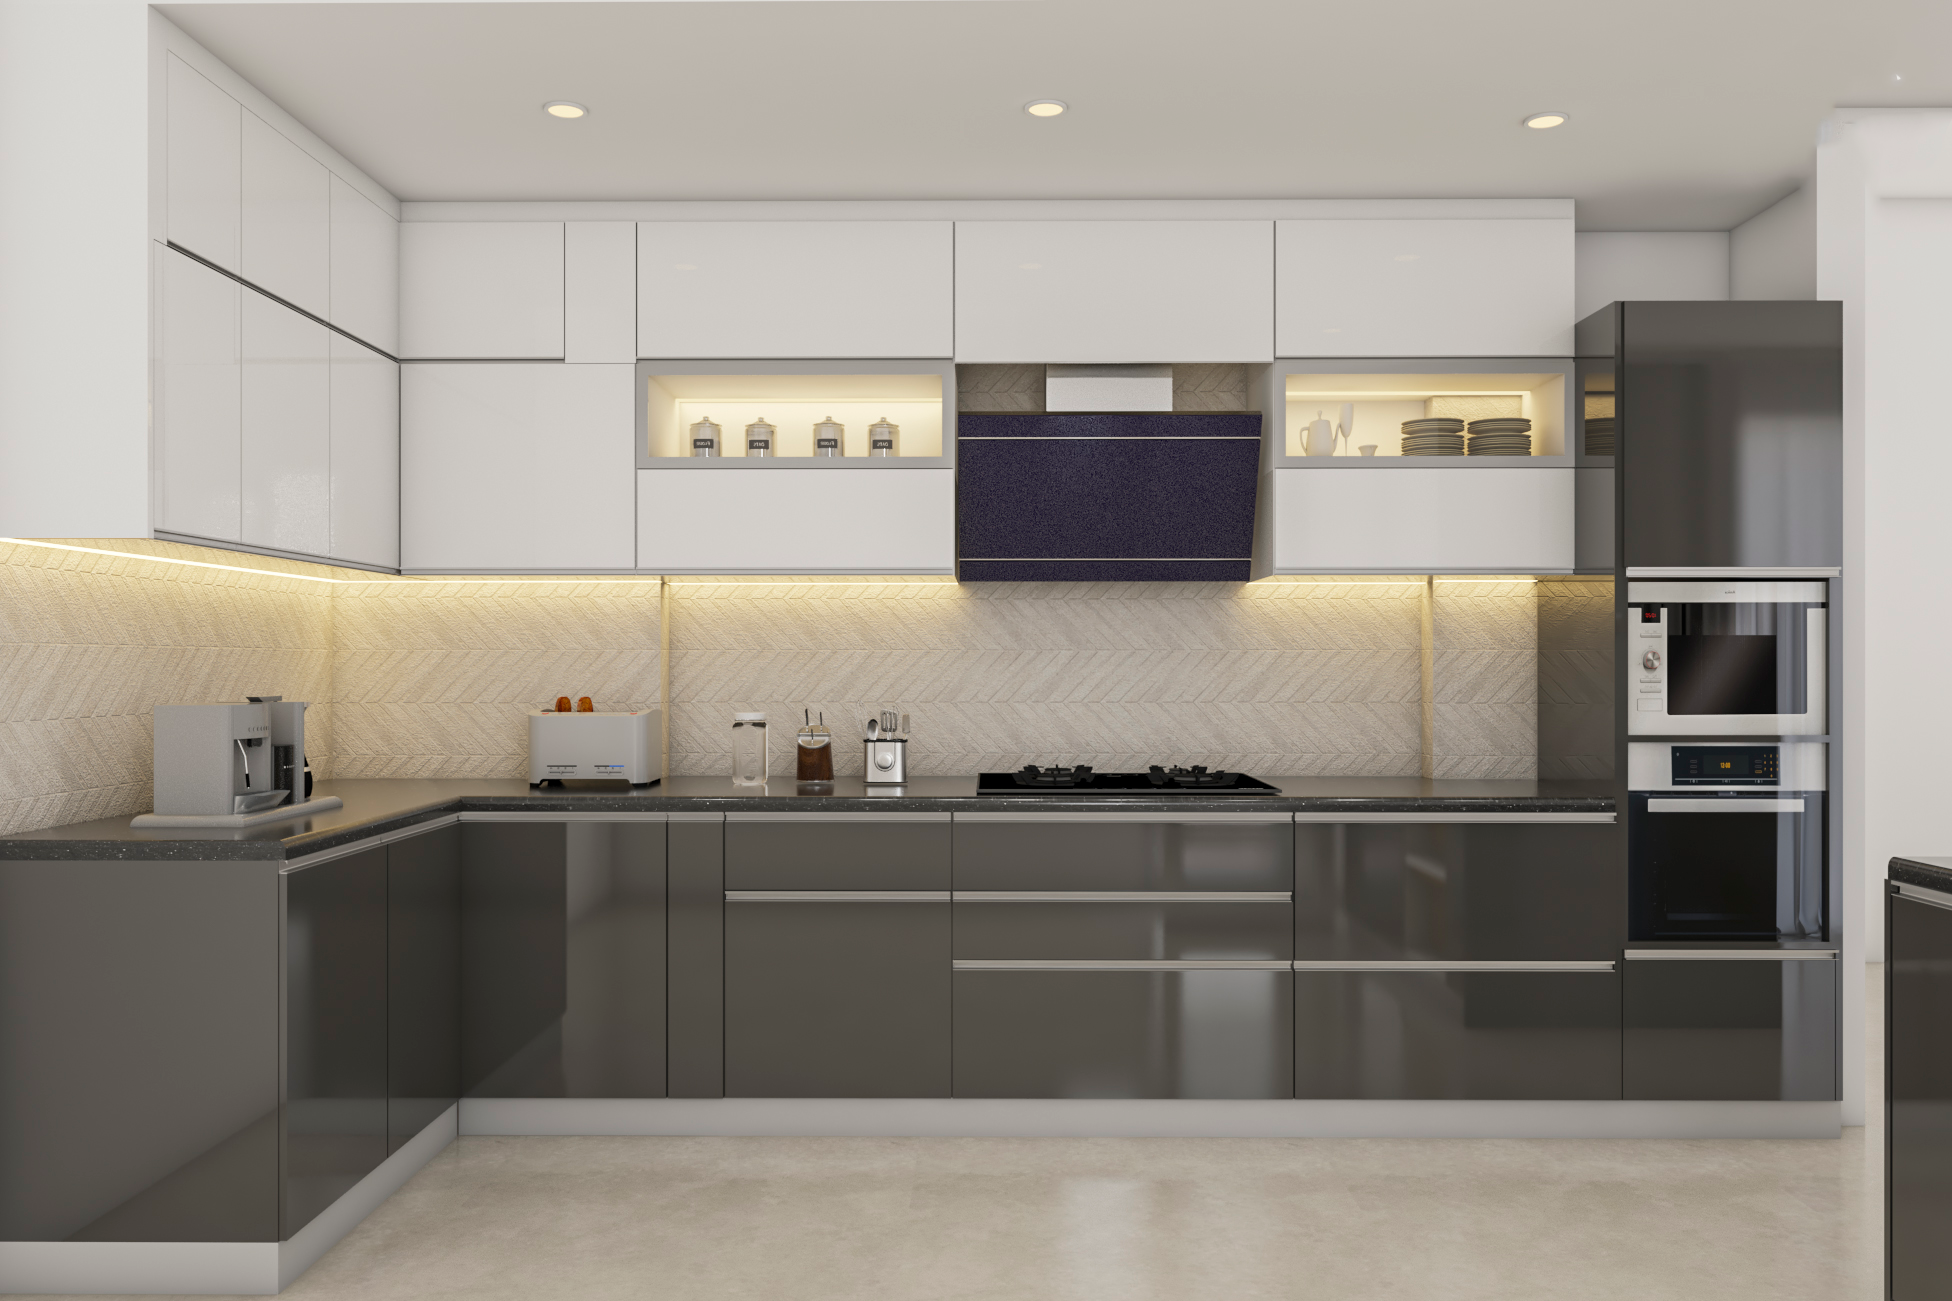 Modern L-Shaped Modular Kitchen Design With Grey And White Cabinets